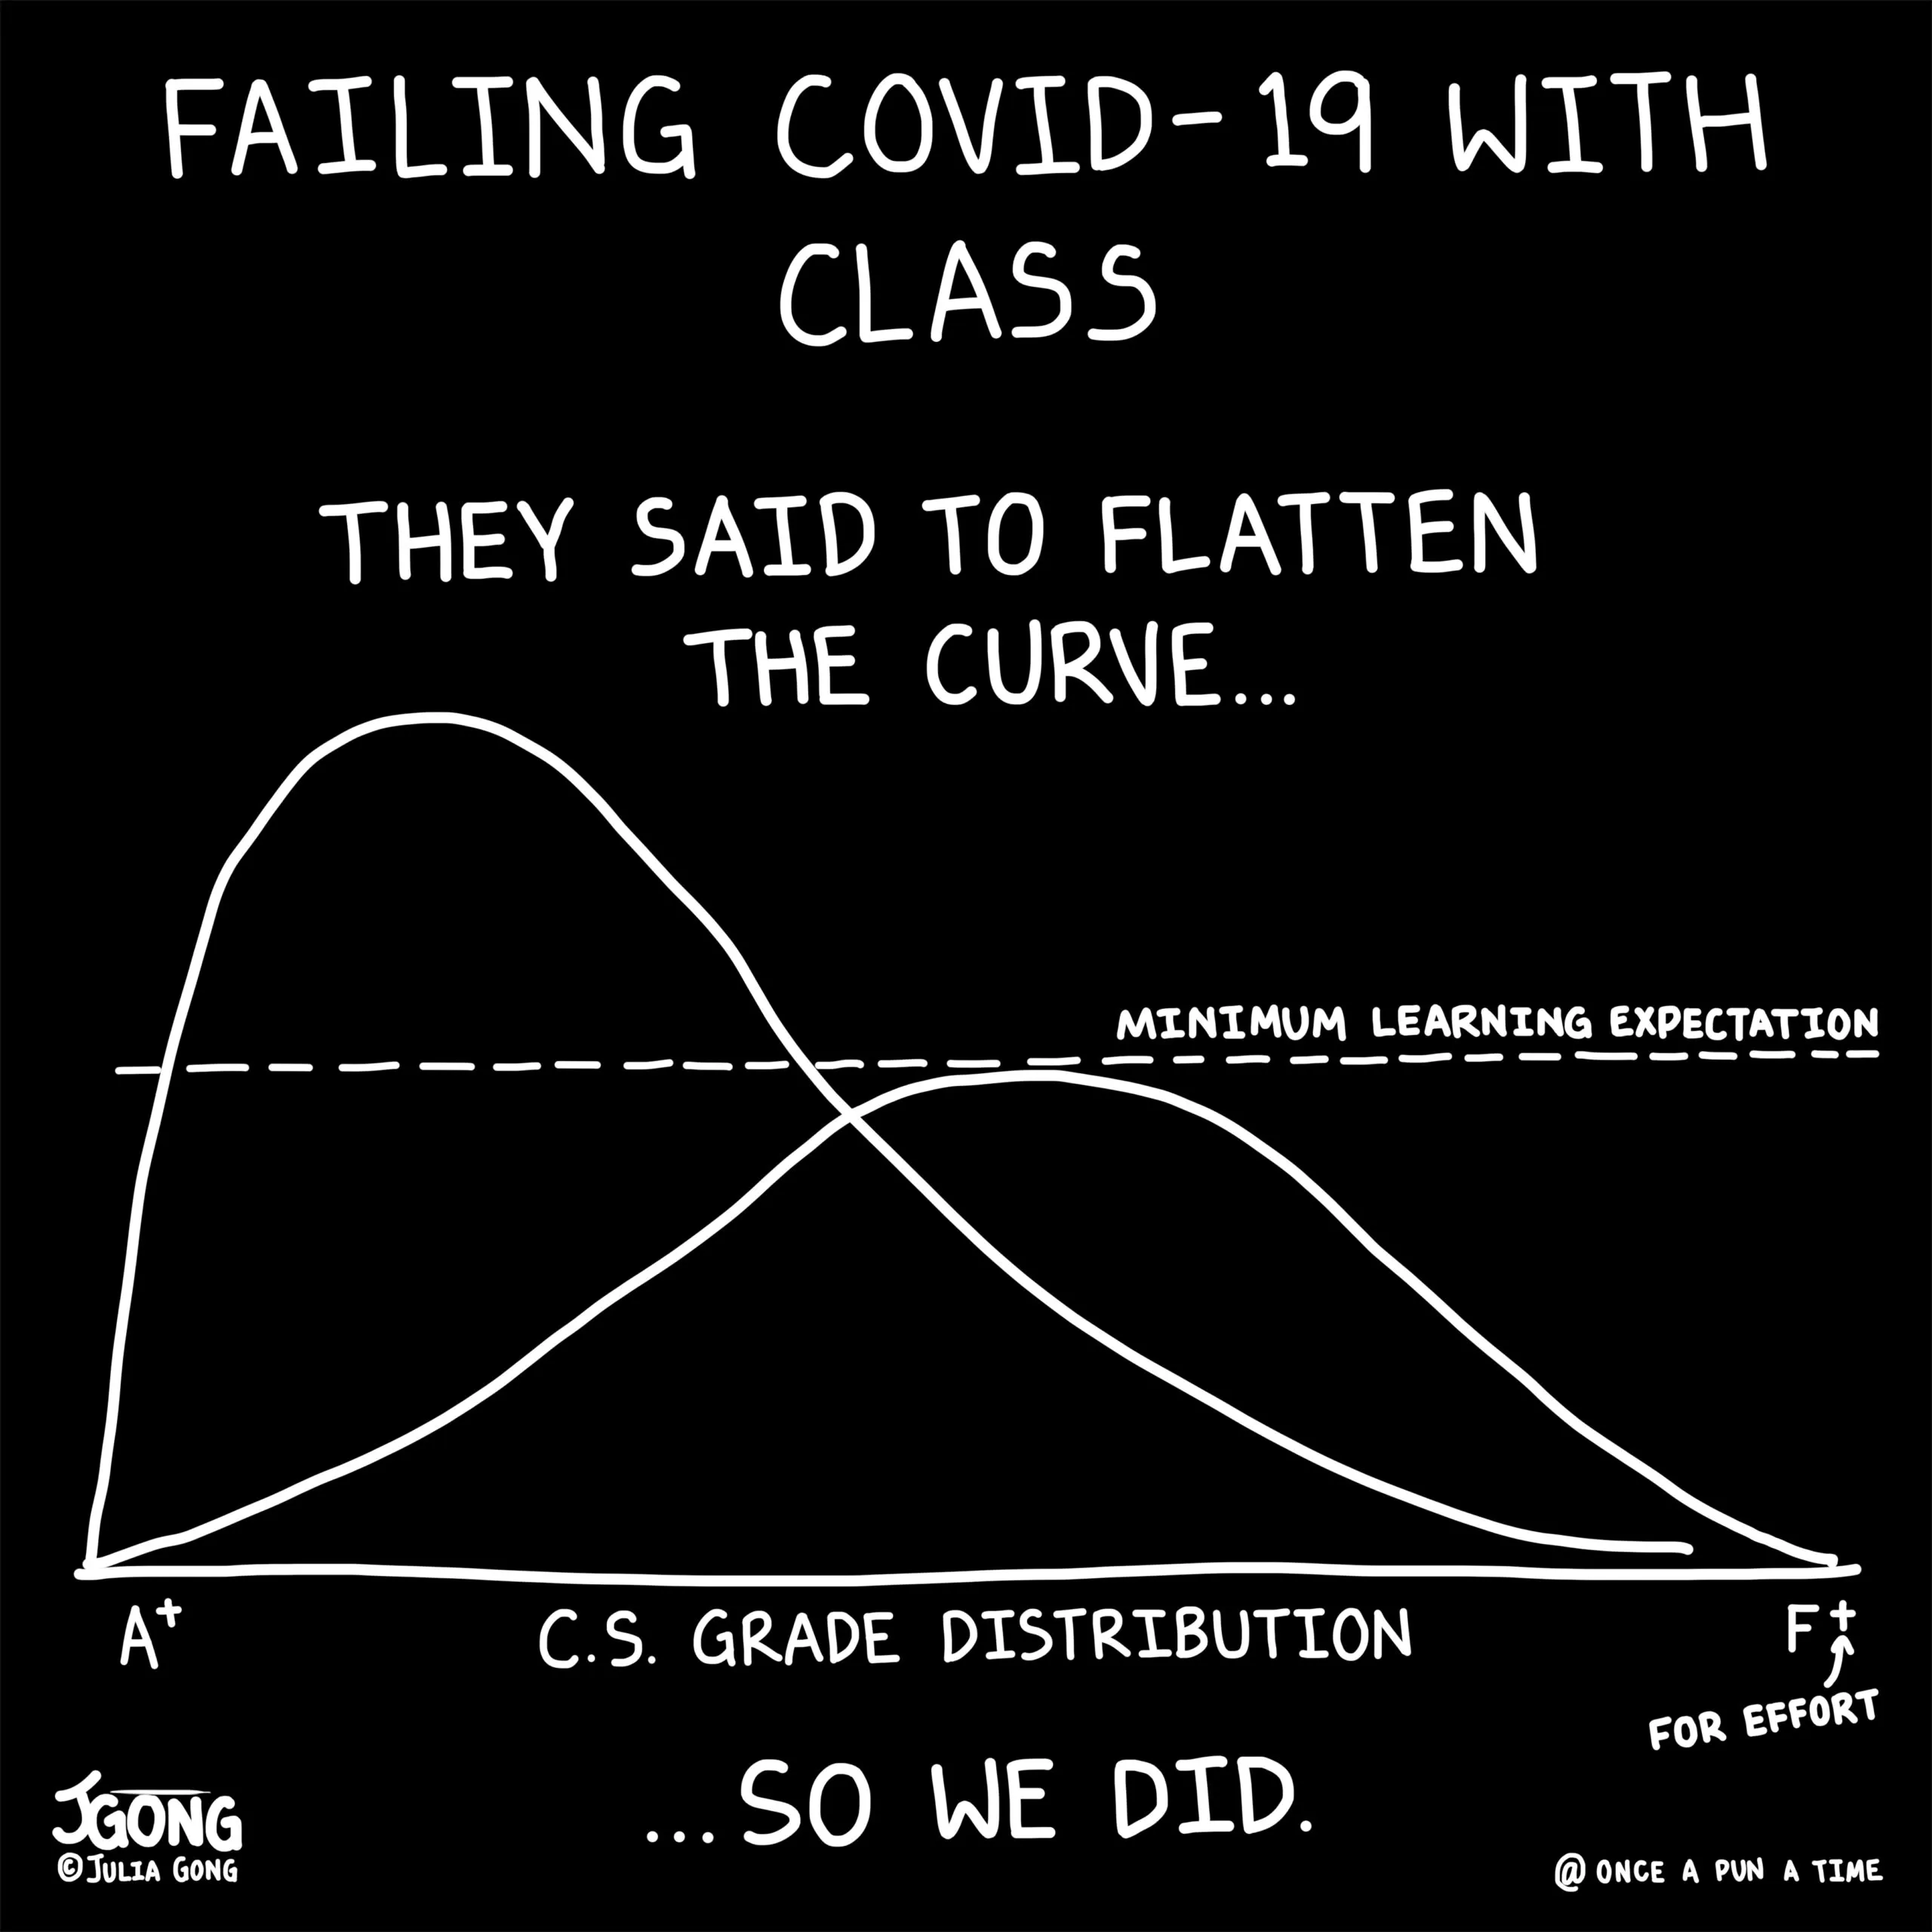 Failing COVID-19 with class: They said to flatten the curve ... so we did.